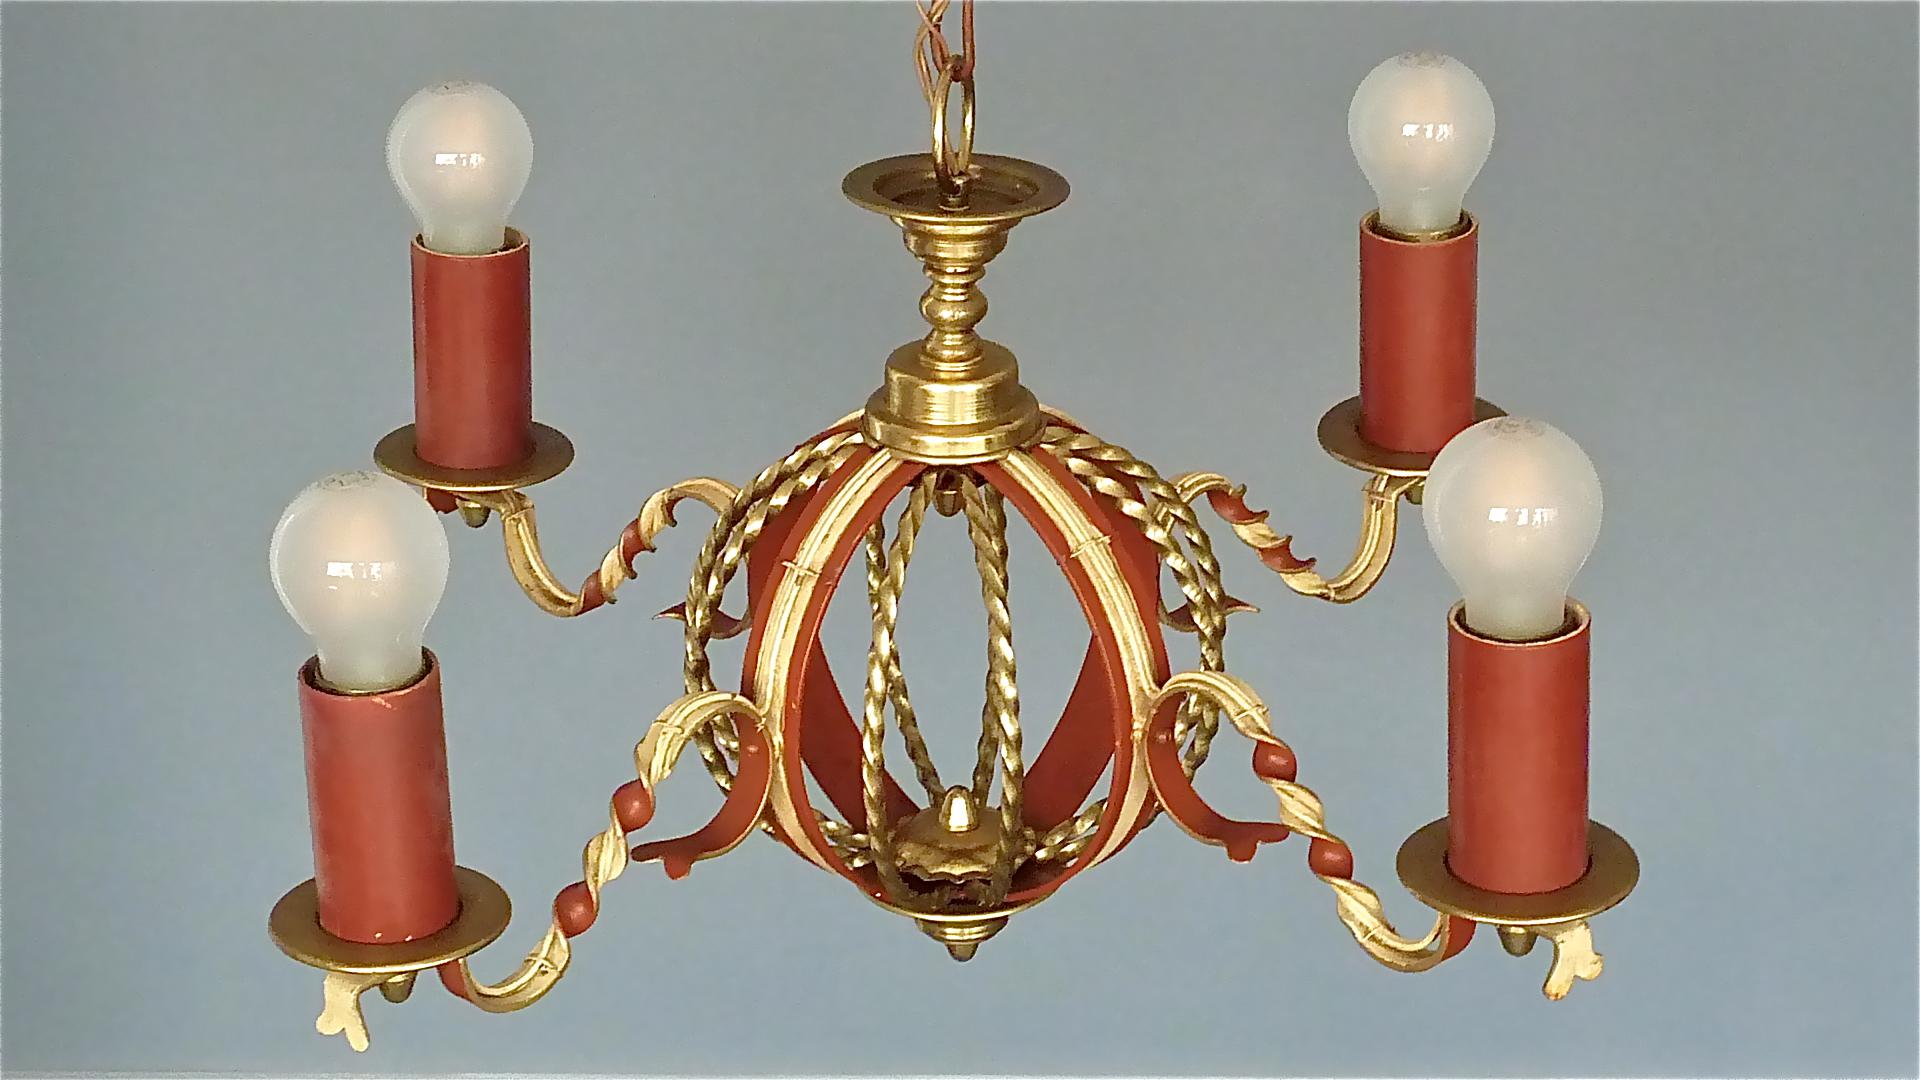 Enameled Large French Poillerat Style Globe Chandelier Wrought Iron Brass 1950s no.1 of 2 For Sale